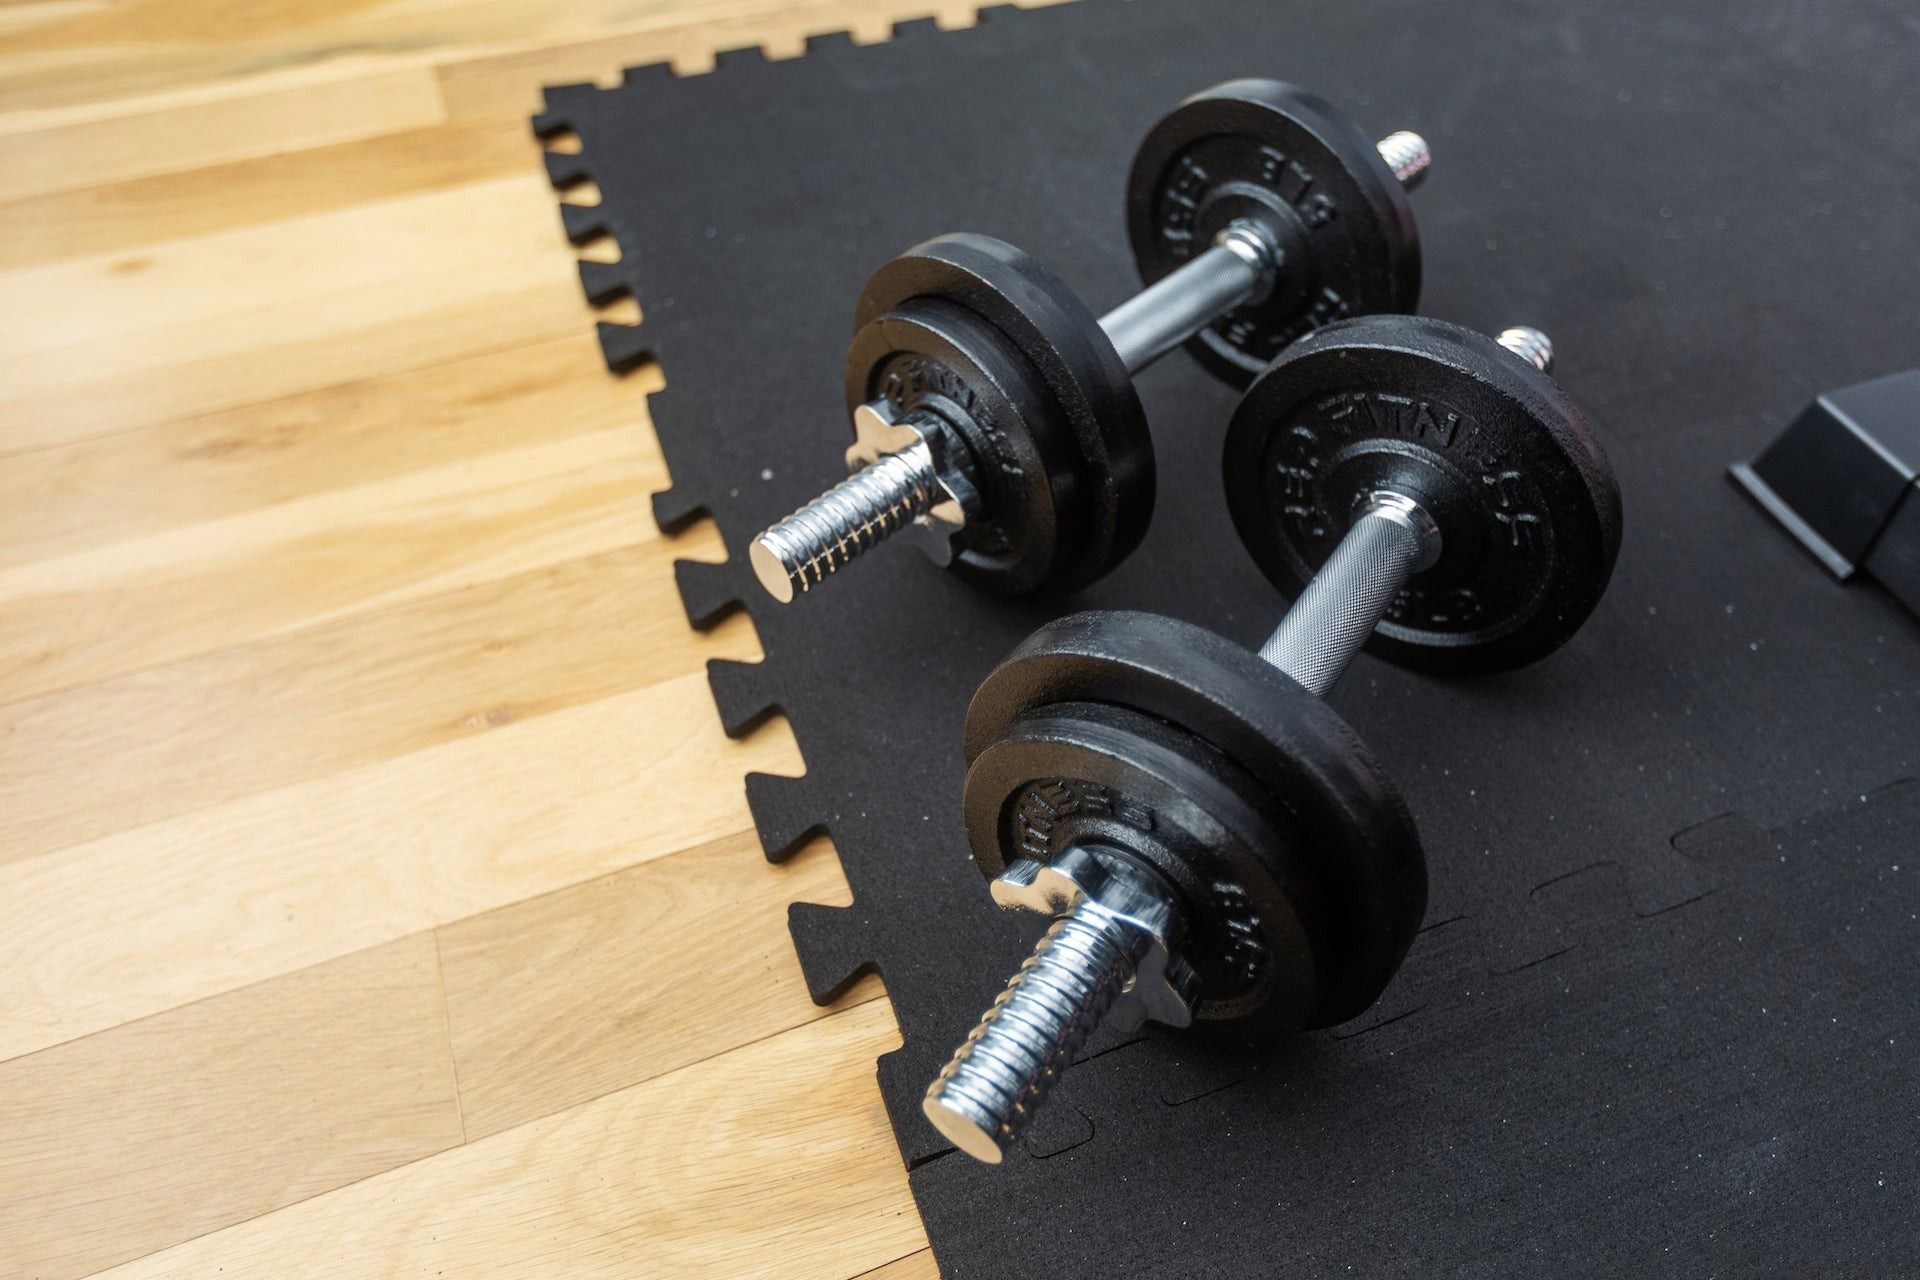 Choosing the Right Home Gym Floor Mats